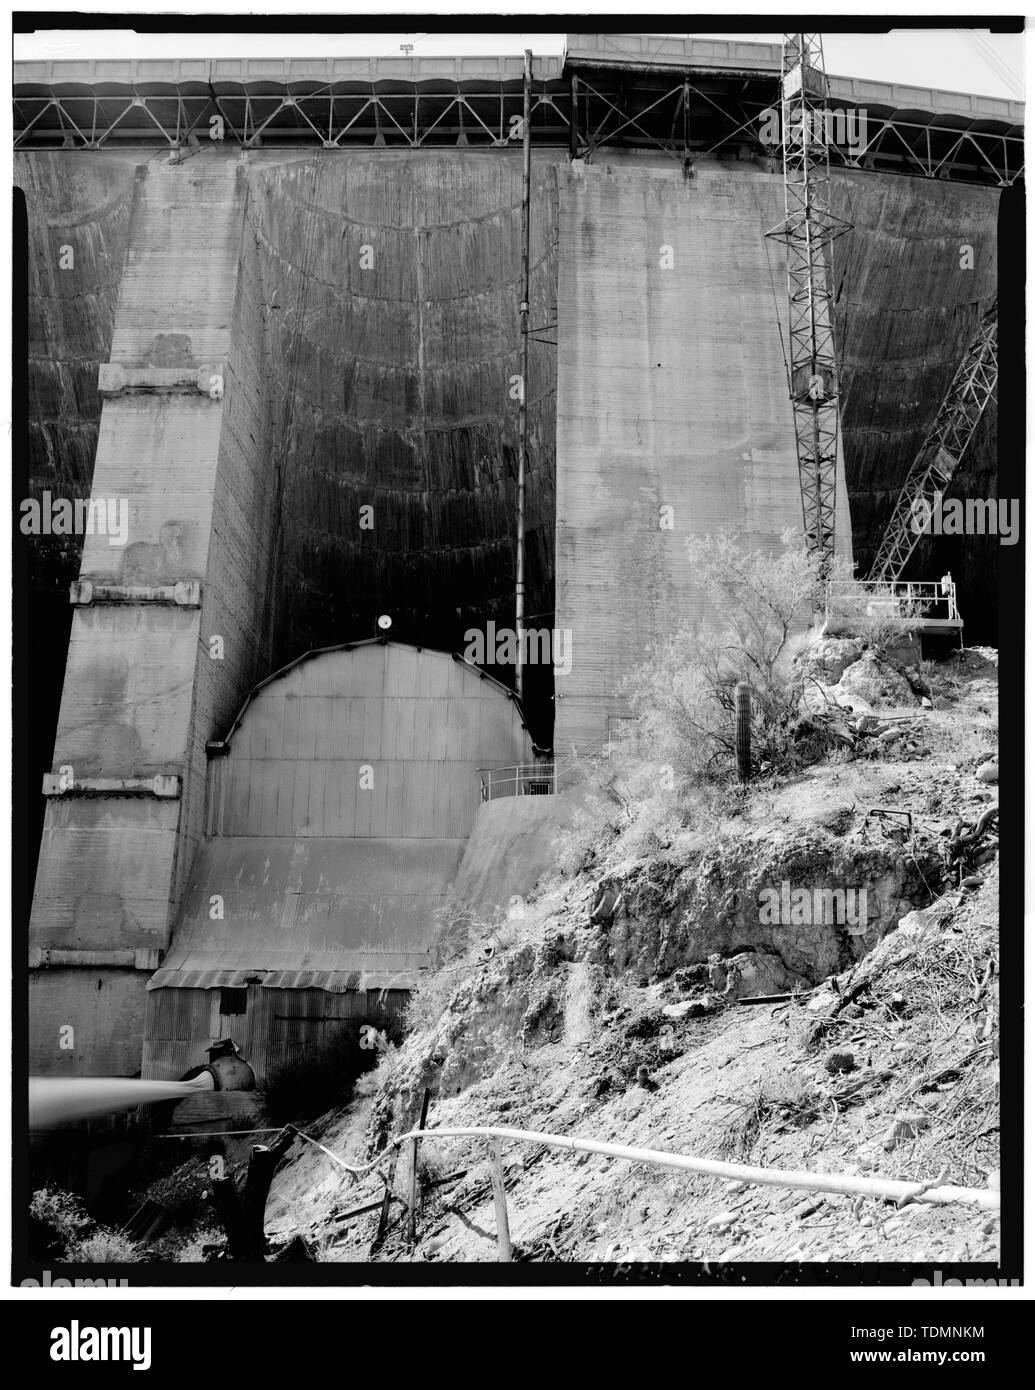 Penstock housing with outlet needle valve at lower left. Roadway support work is visible at top. Photographer Mark Durben. Source- Salt River Project. - Waddell Dam, On Agua Fria River, 35 miles northwest of Phoenix, Phoenix, Maricopa County, AZ Stock Photo